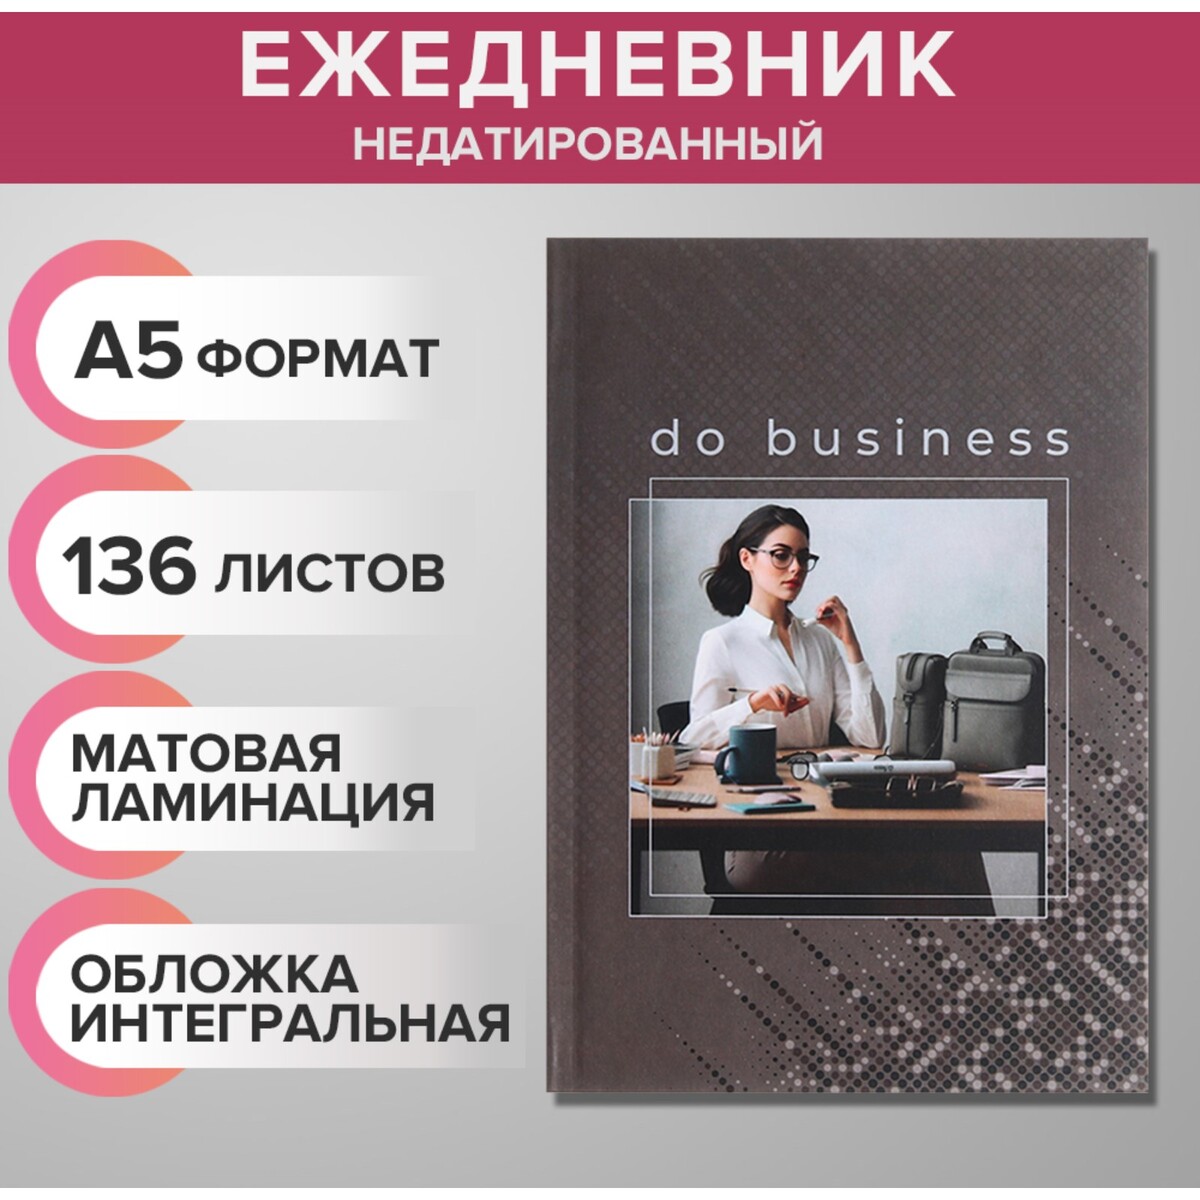     5 136 ,  ,  , business woman